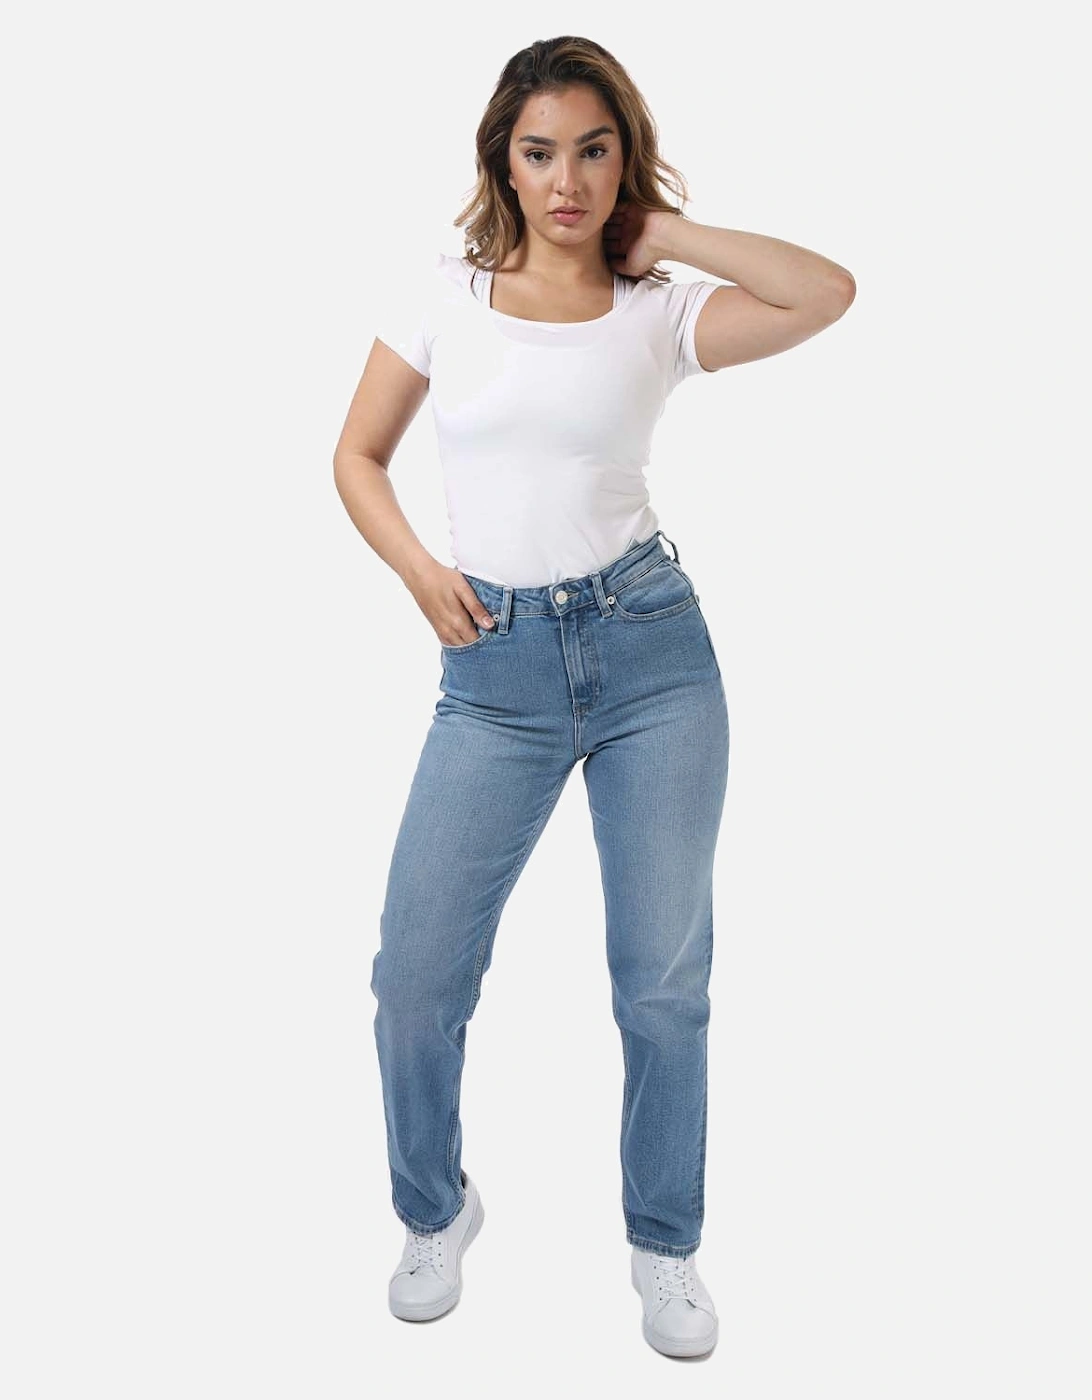 Womens High Rise Classic Jeans